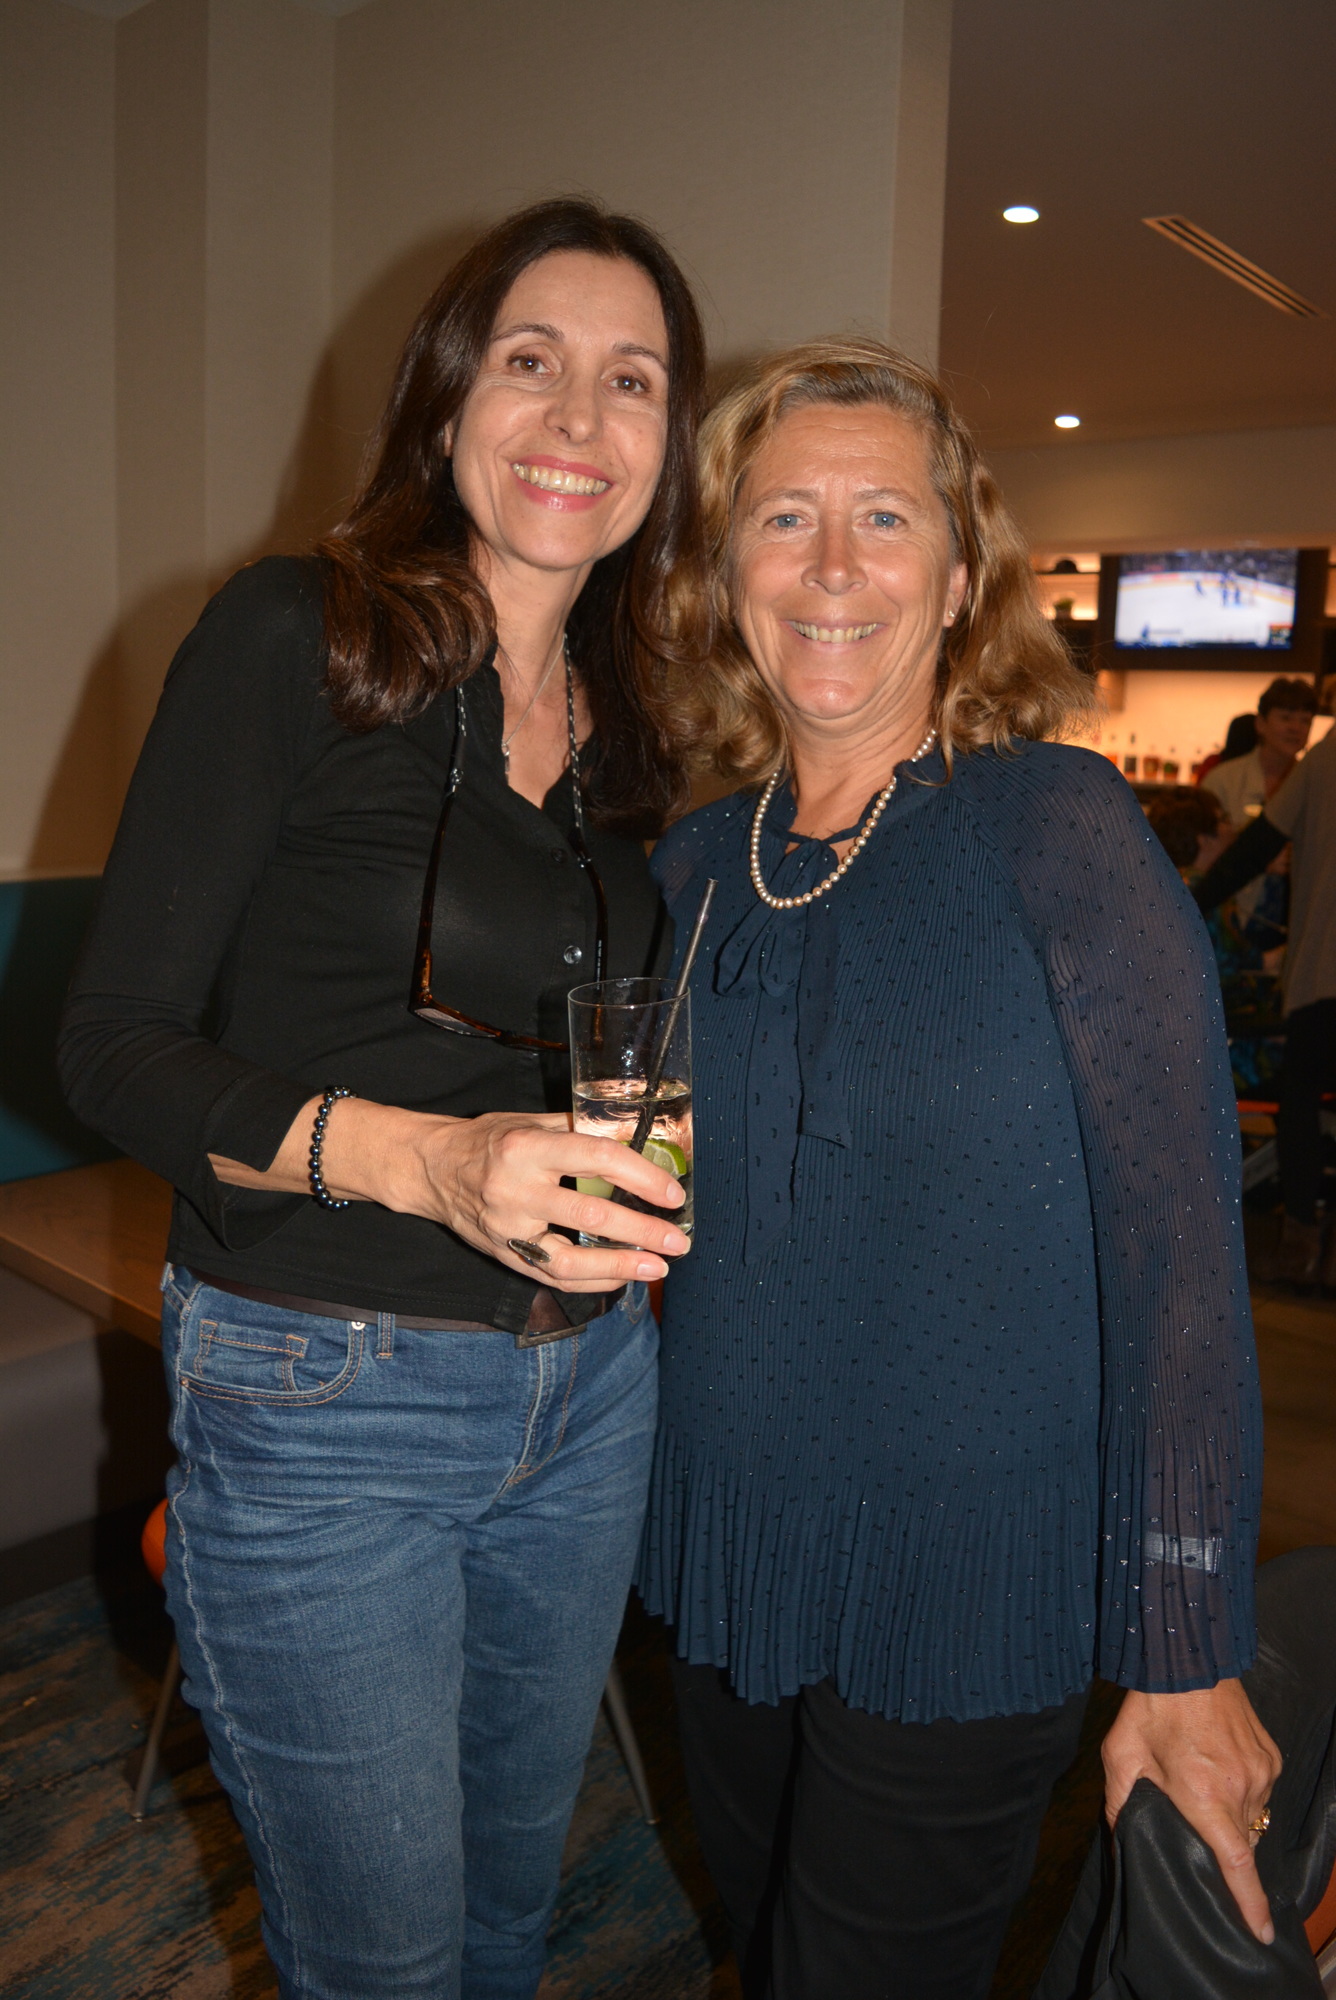 Event organizer and Riverwalk resident Régine Tatem met a fellow France native, Marie-Laure Ricaud, of Sarasota, who came to make friends and practice her English.